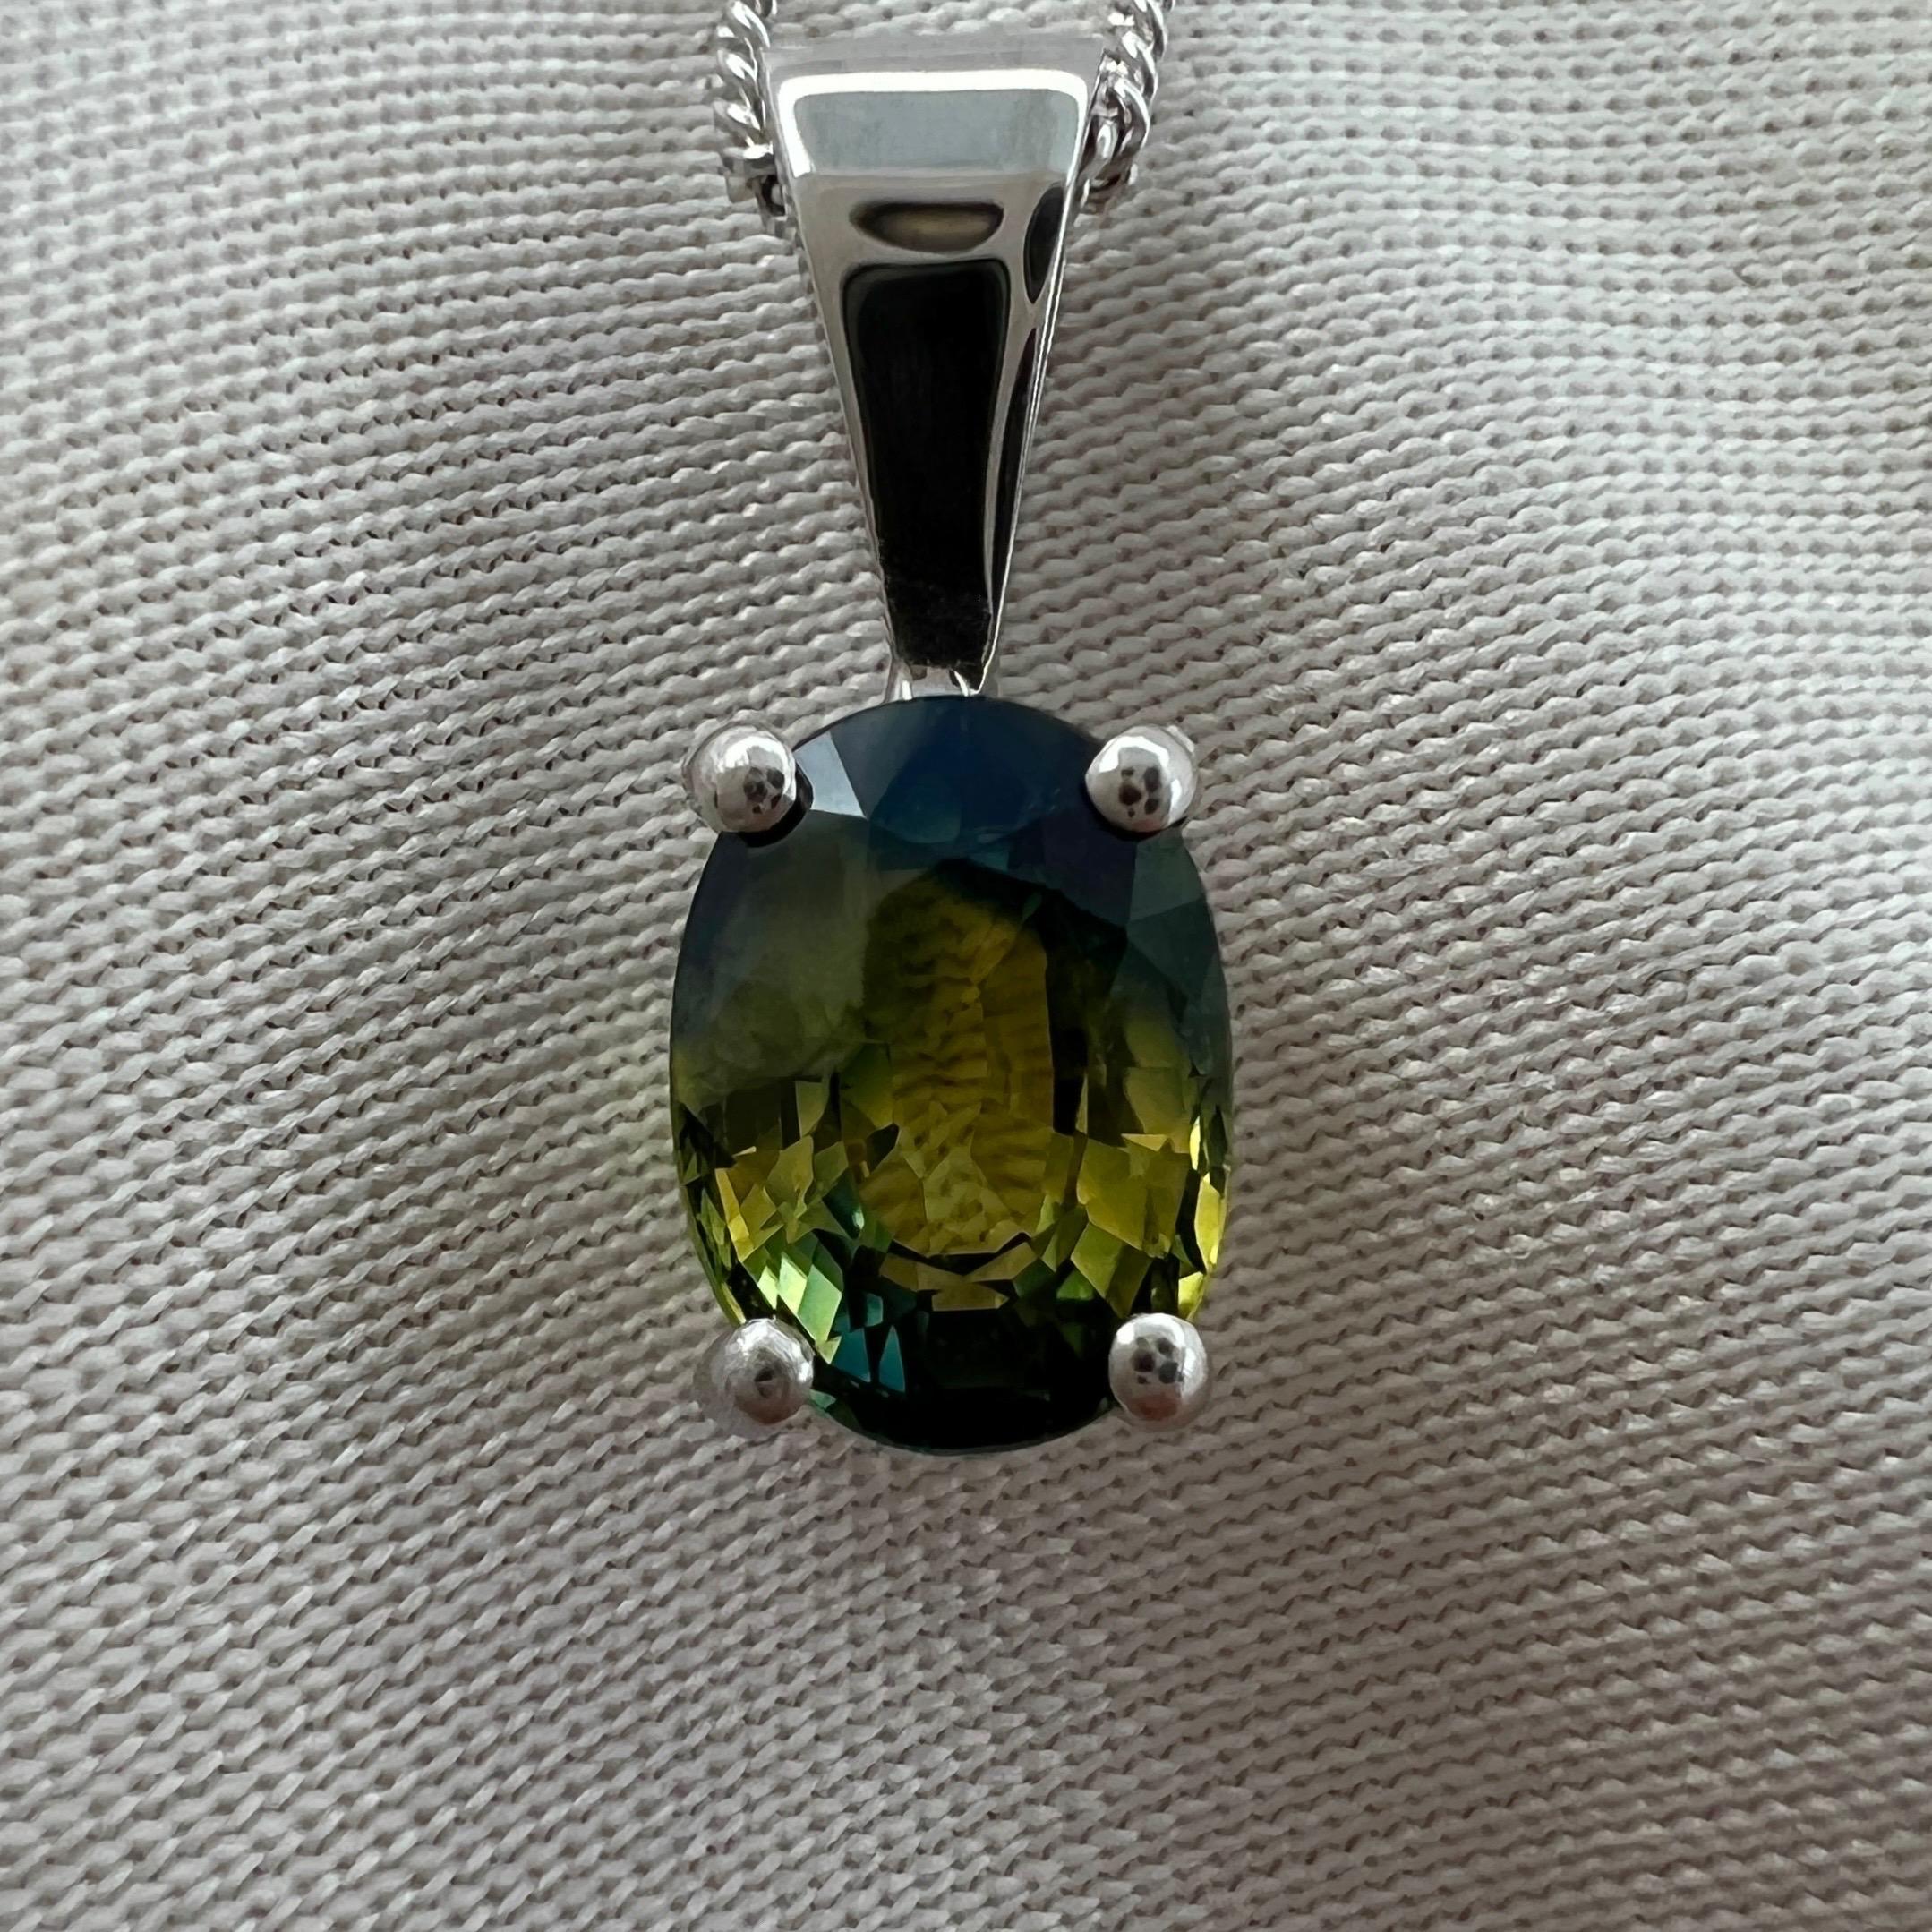 Natural GIA Certified Untreated Parti Colour Australian Sapphire 18k White Gold Pendant Necklace.

1.09 Carat oval cut sapphire with a stunning parti colour effect. Unique blue, yellow and green colour zoning. Stunning gem.

Also has good clarity